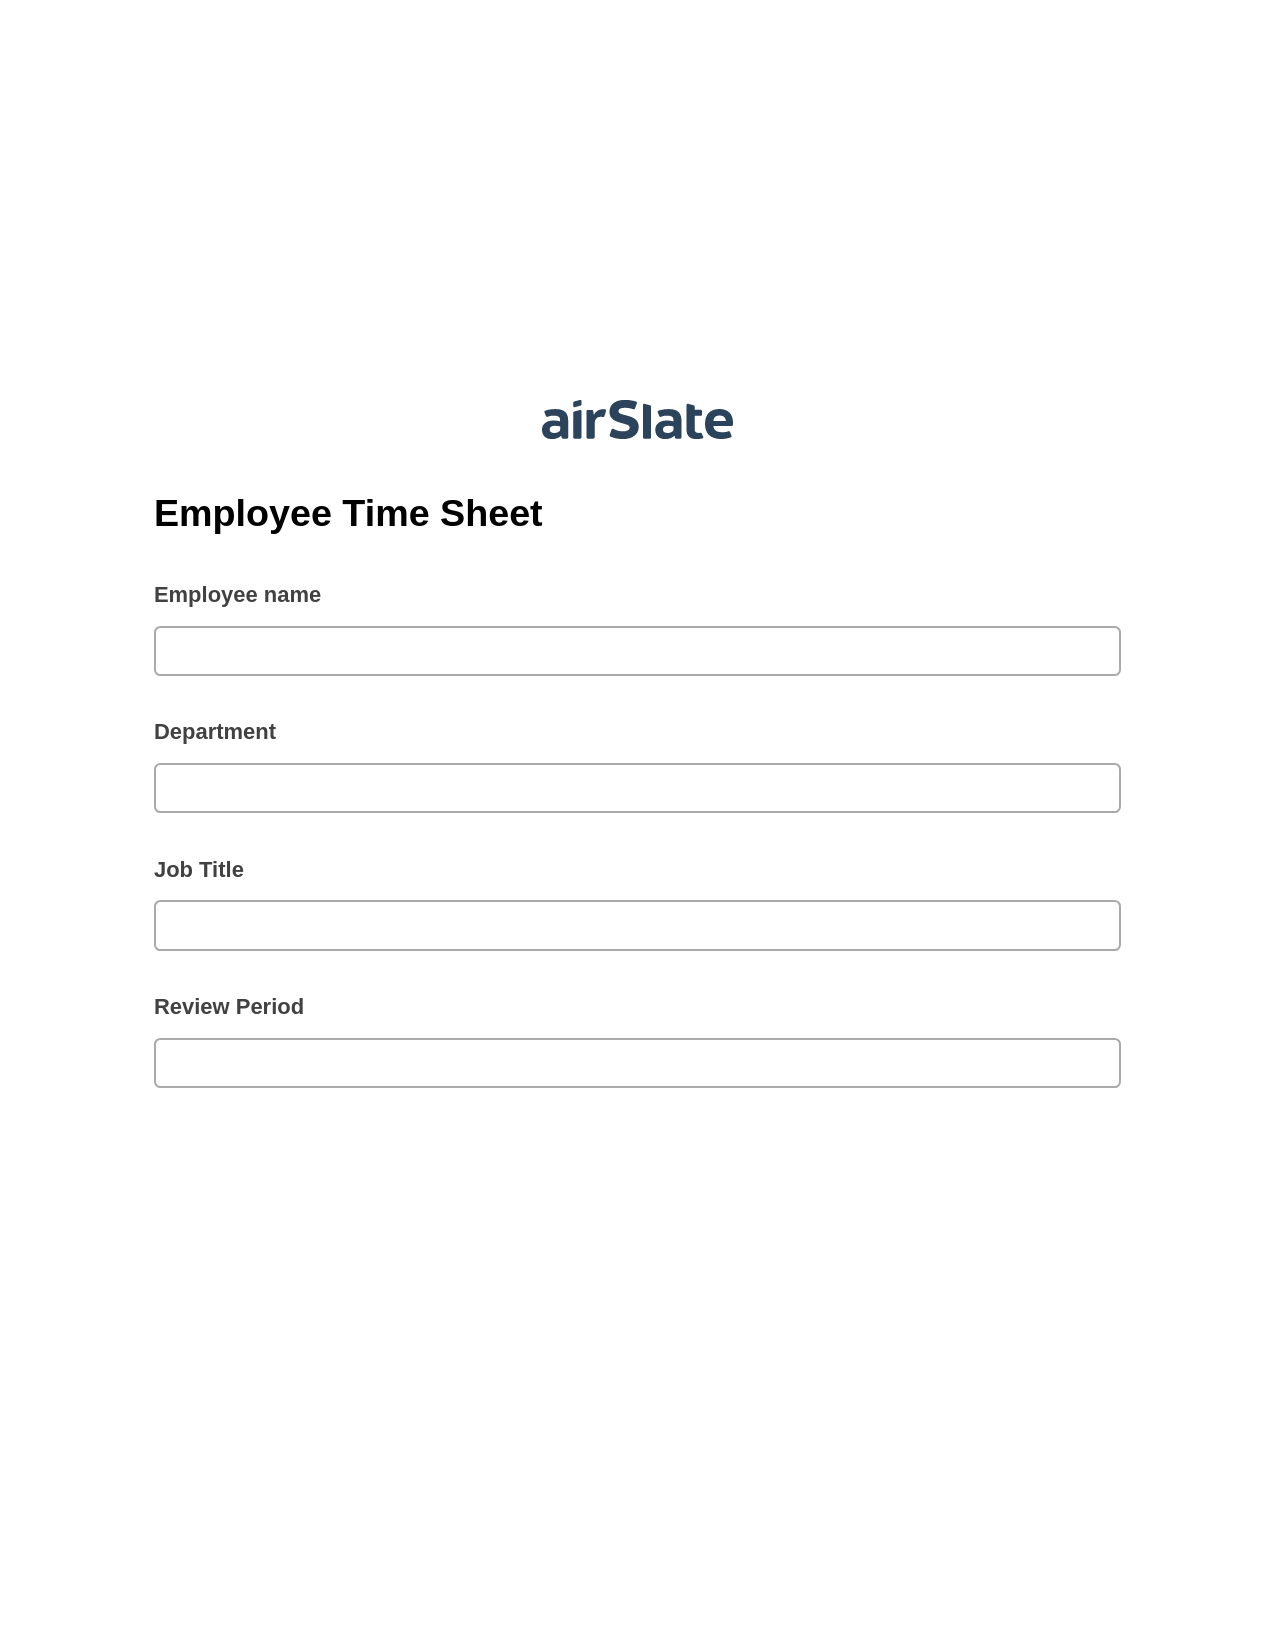 Employee Time Sheet Pre-fill from CSV File Bot, Update Audit Trail Bot, Export to NetSuite Bot